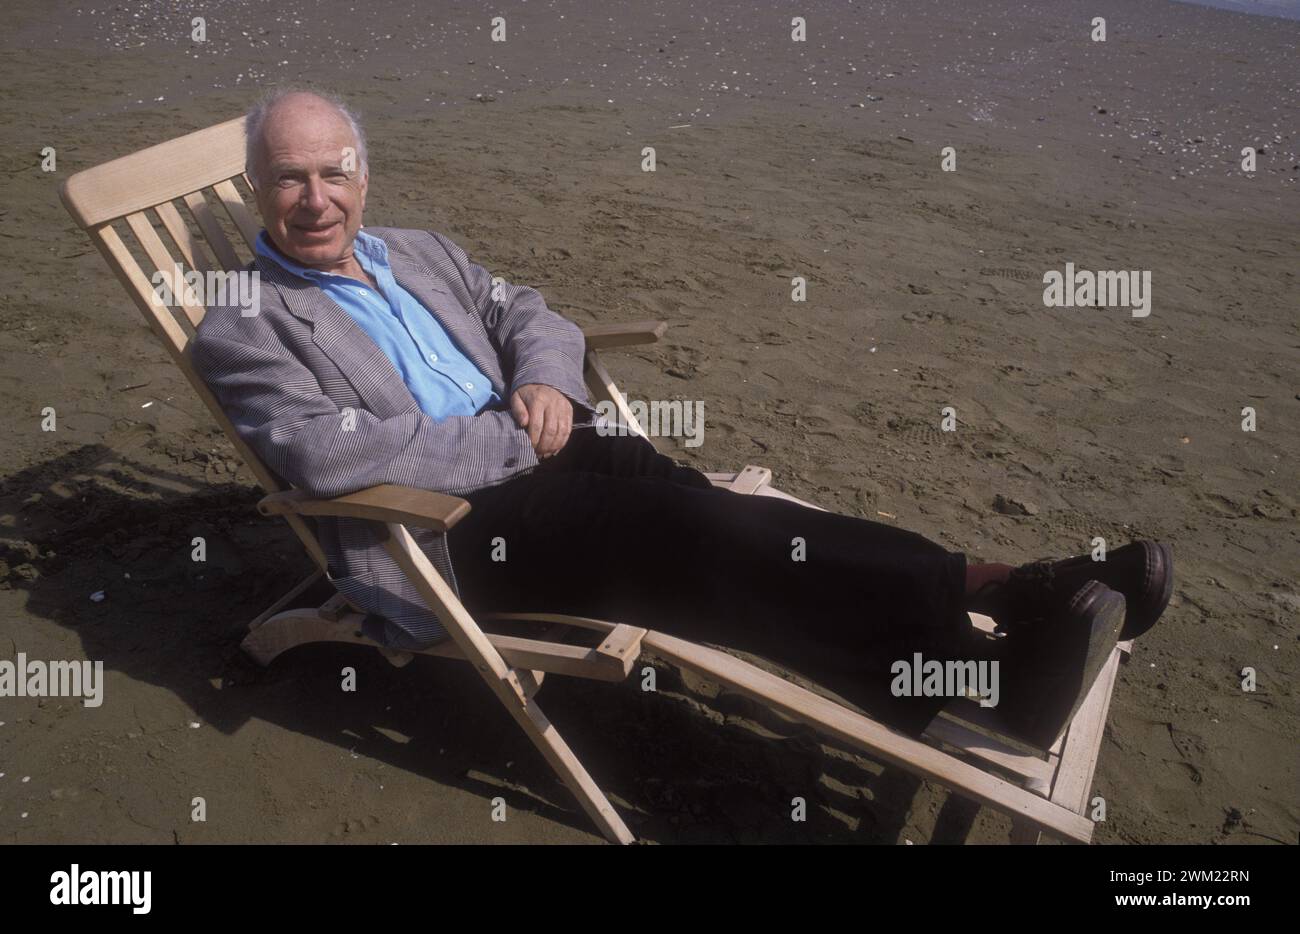 MME4766642 Venice Lido, Venice Film Festival 1989. British director Peter Brook, in commpetition with the movie “” The Mahabharata””/Lido di Venezia, Film Festival of Venezia 1989. He registered Peter Brook, in concorso with the film “” The Mahabharata”” -; (add.info.: Venice Lido, Venice Film Festival 1989. British director Peter Brook, in commpetition with the movie “” The Mahabharata””/Lido di Venezia, Film Festival of Venezia 1989. He registered Peter Brook, in concorso with the film “” The Mahabharata”” -); © Marcello Mencarini. All rights reserved 2024. Stock Photo